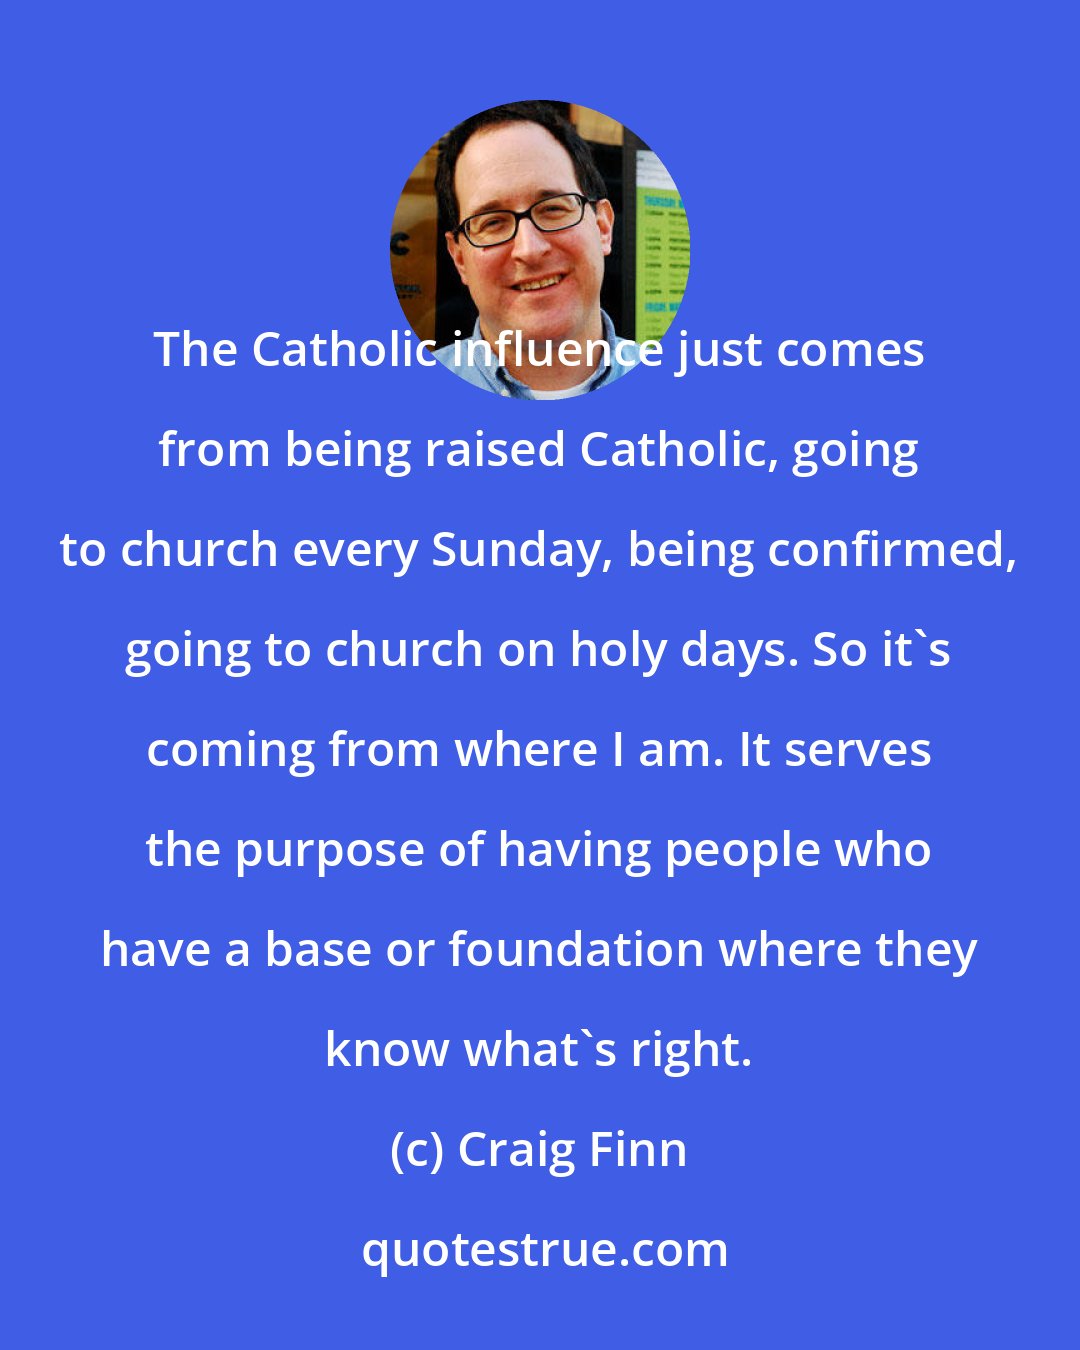 Craig Finn: The Catholic influence just comes from being raised Catholic, going to church every Sunday, being confirmed, going to church on holy days. So it's coming from where I am. It serves the purpose of having people who have a base or foundation where they know what's right.